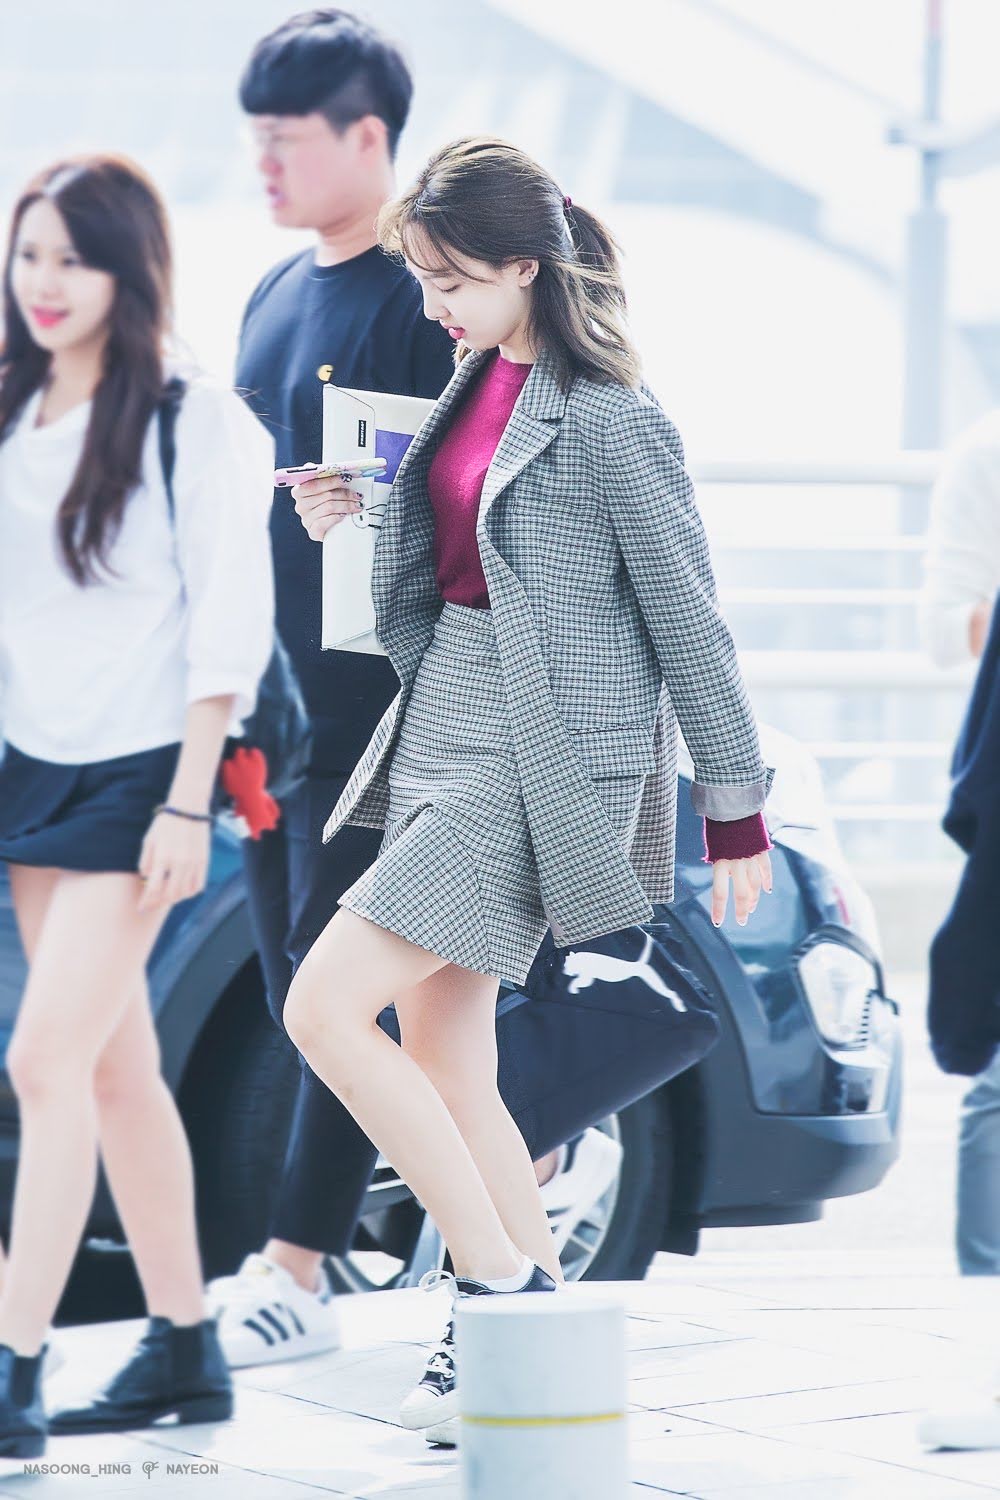 twice-nayeons-casual-airport-fashion-will-make-you-want-to-raid-her-closet